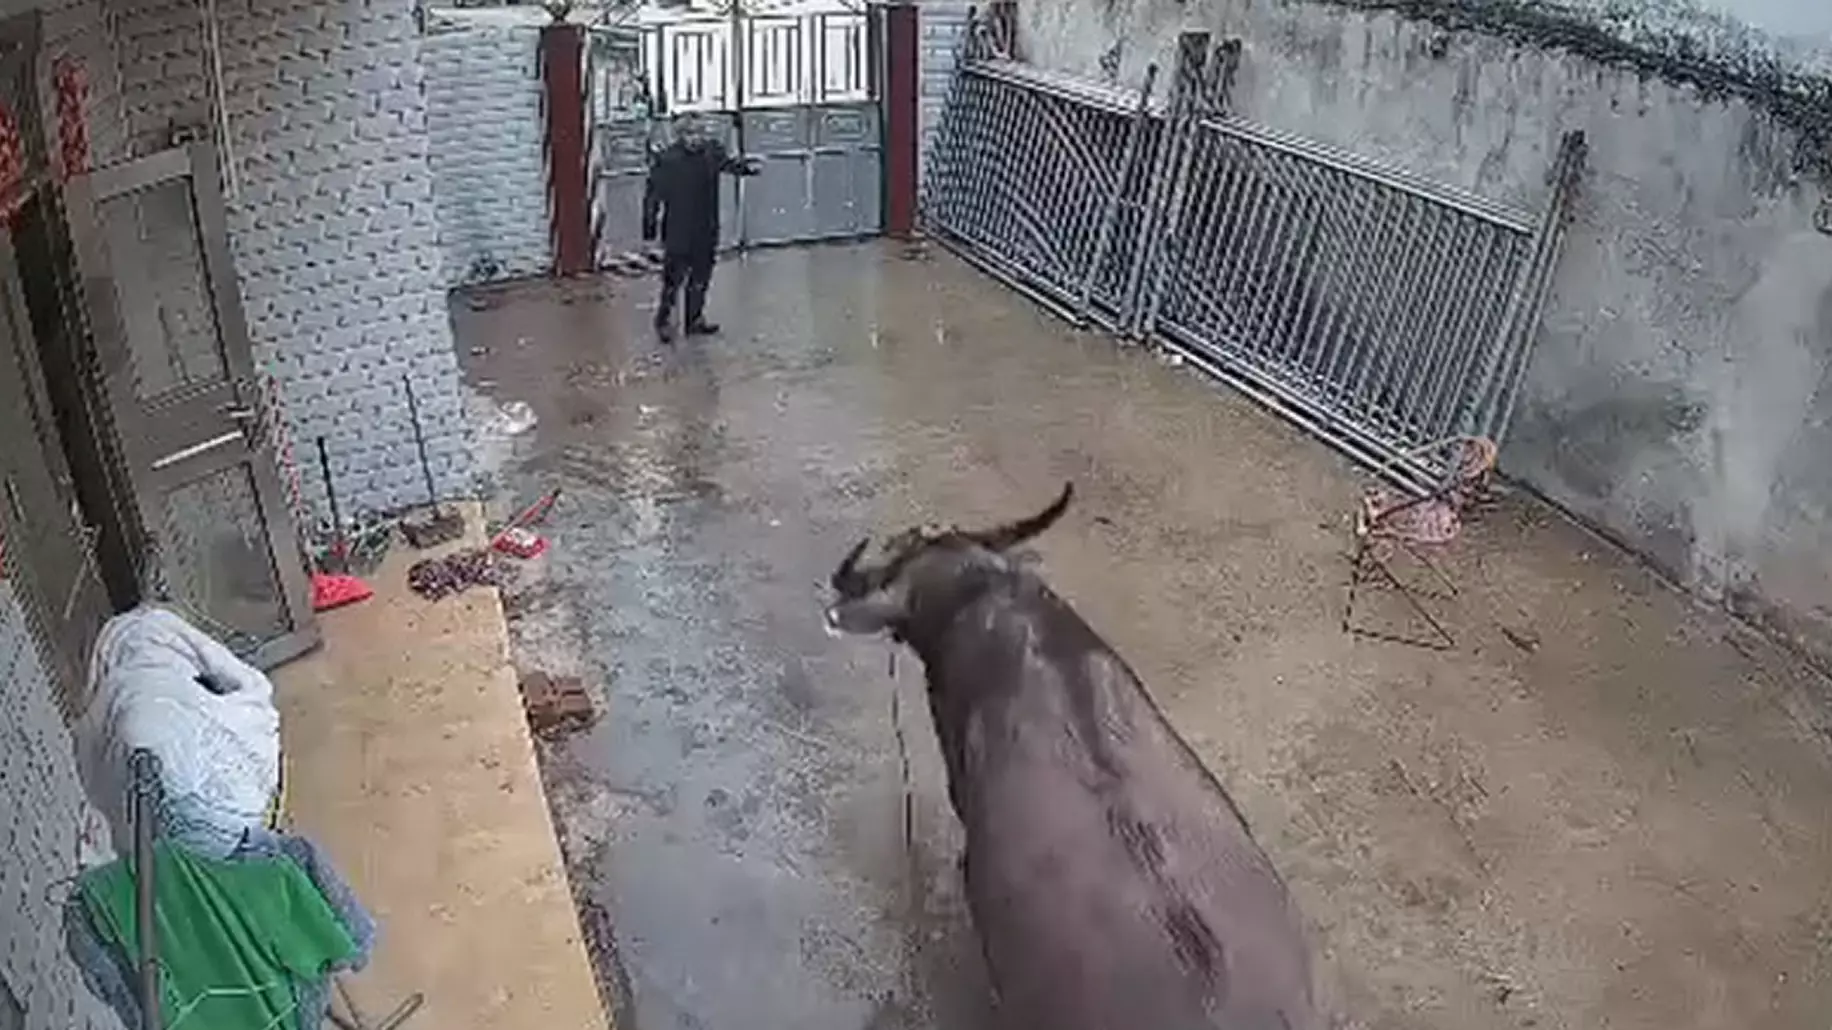 Buffalo Bull Escapes Slaughterhouse And Attacks Owner